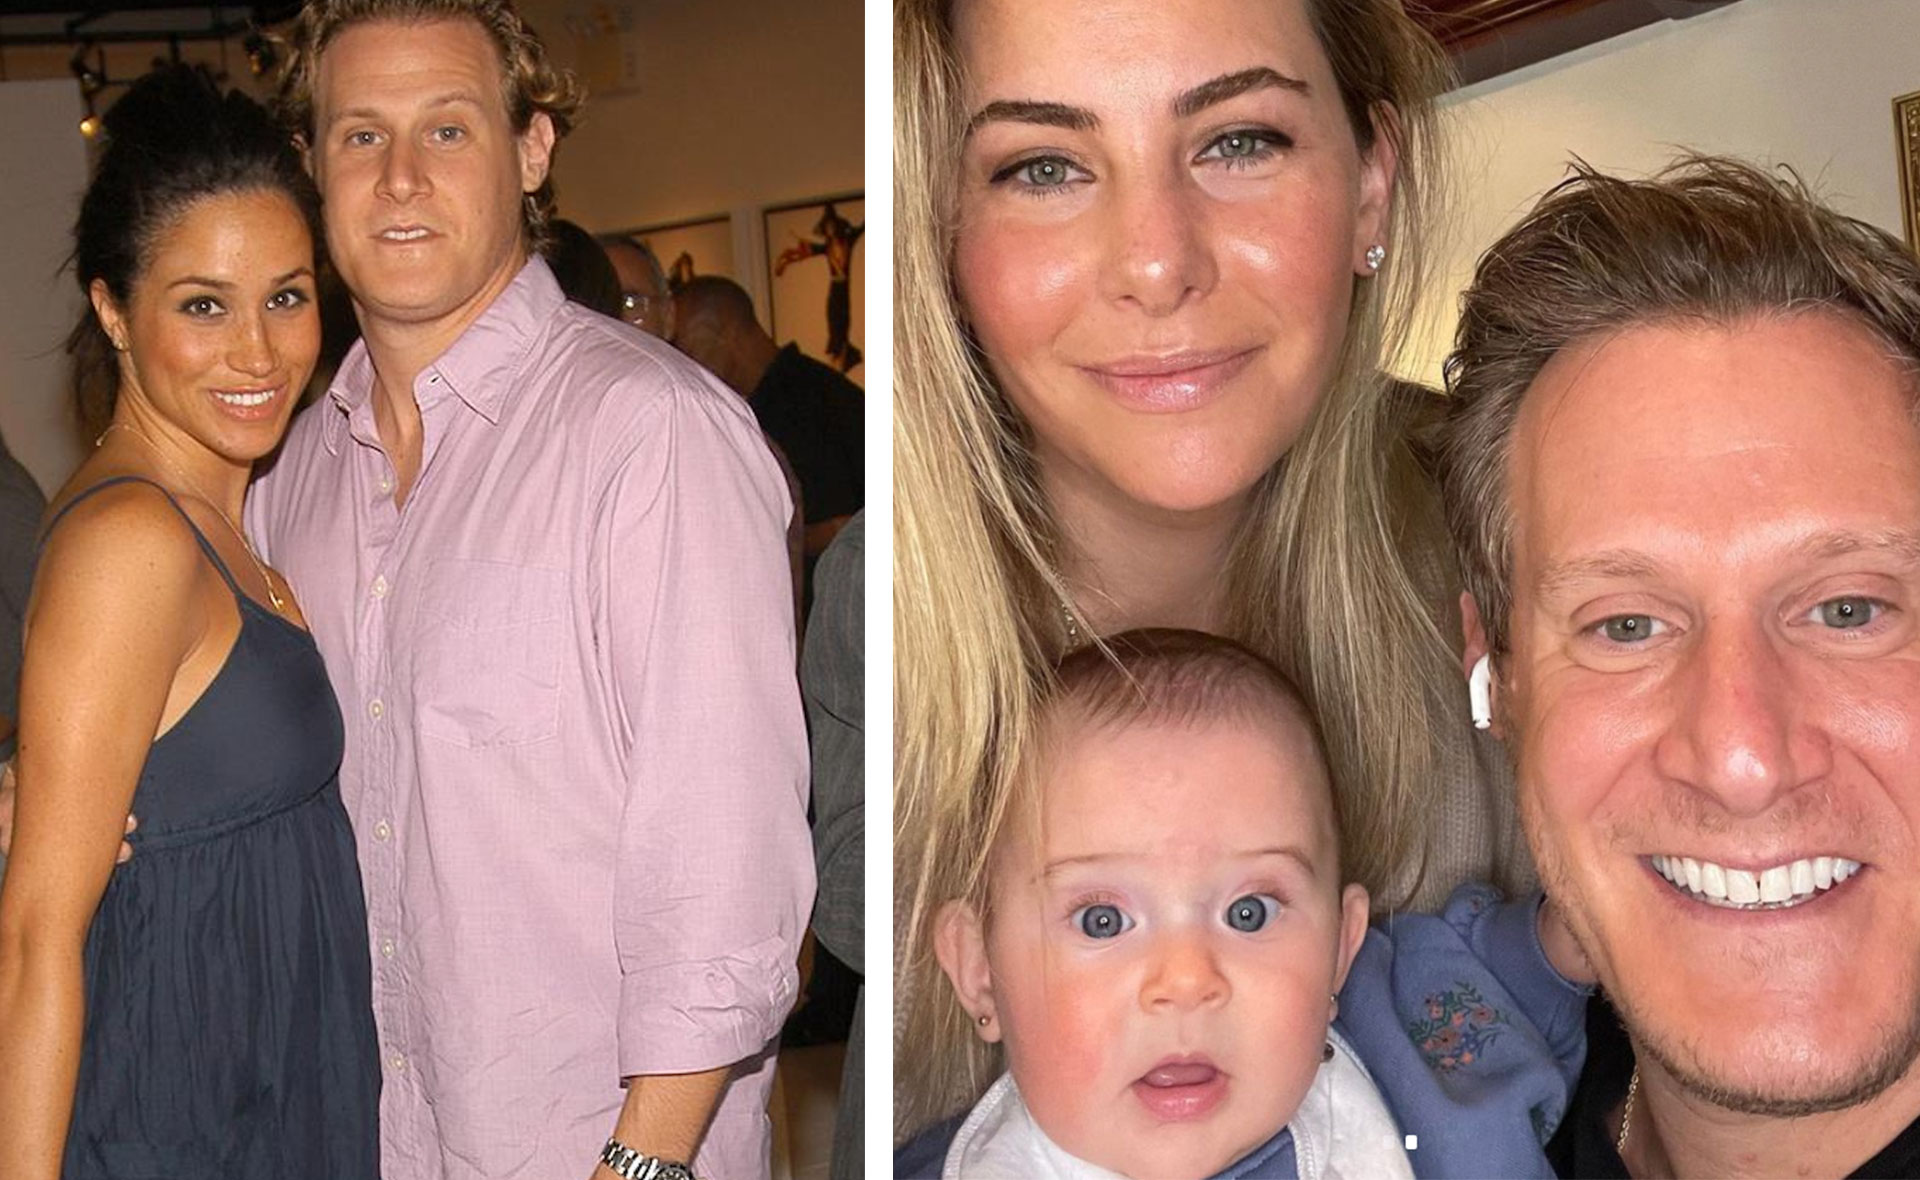 Inside Meghan Markle’s ex-husband Trevor Engelson’s blissfully happy life with his new wife and daughters